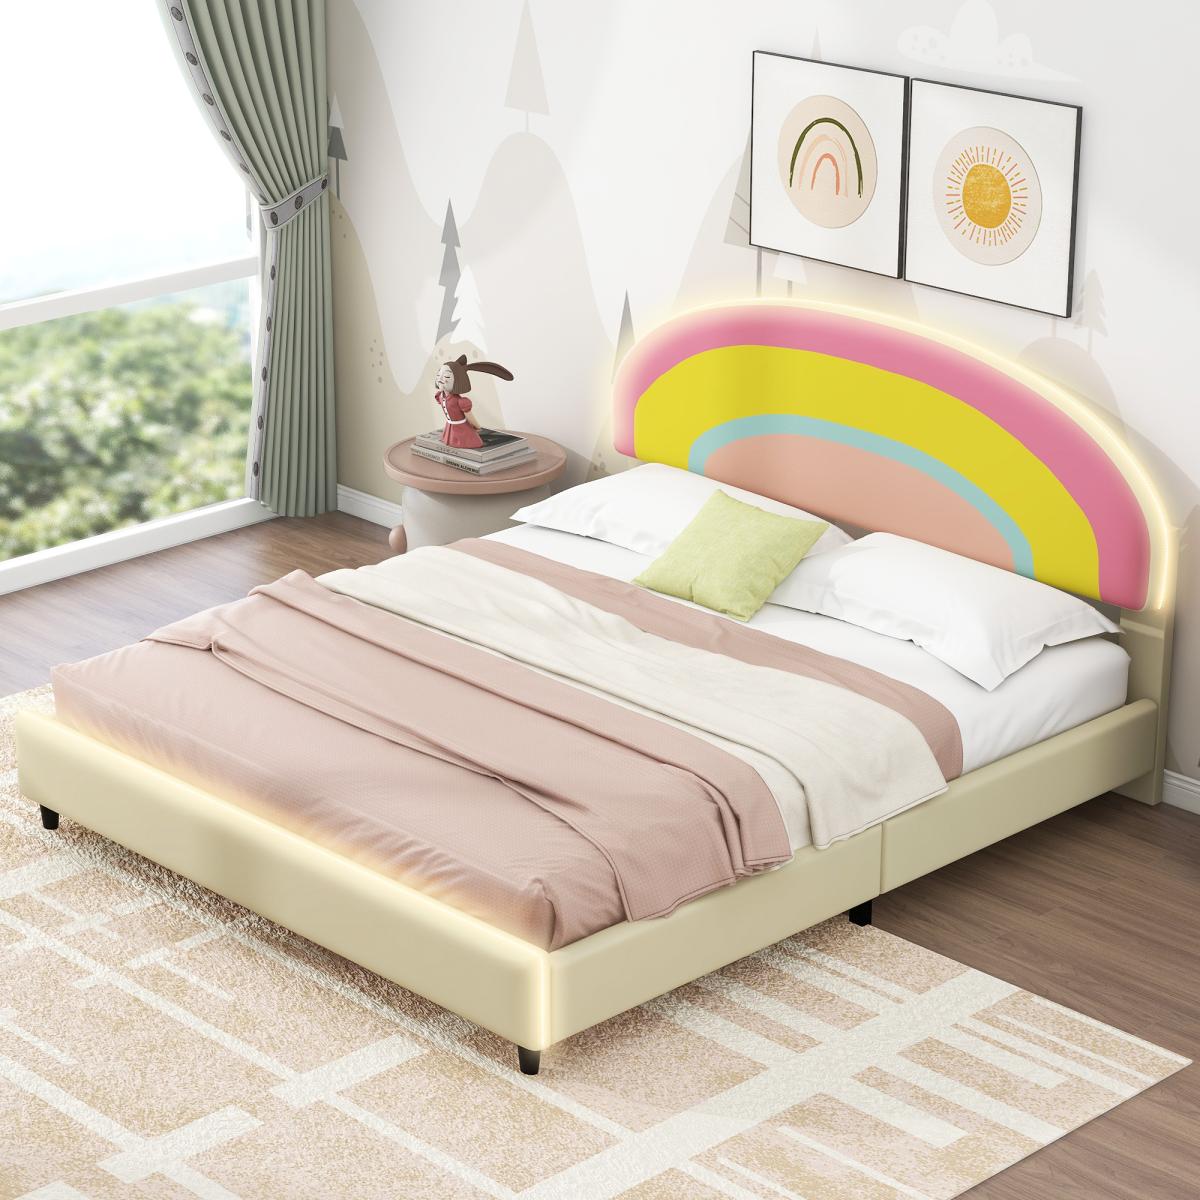 Full Size Upholstered Platform Bed with Rainbow Shaped and Height-adjustbale Headboard,LED Light Strips,Beige